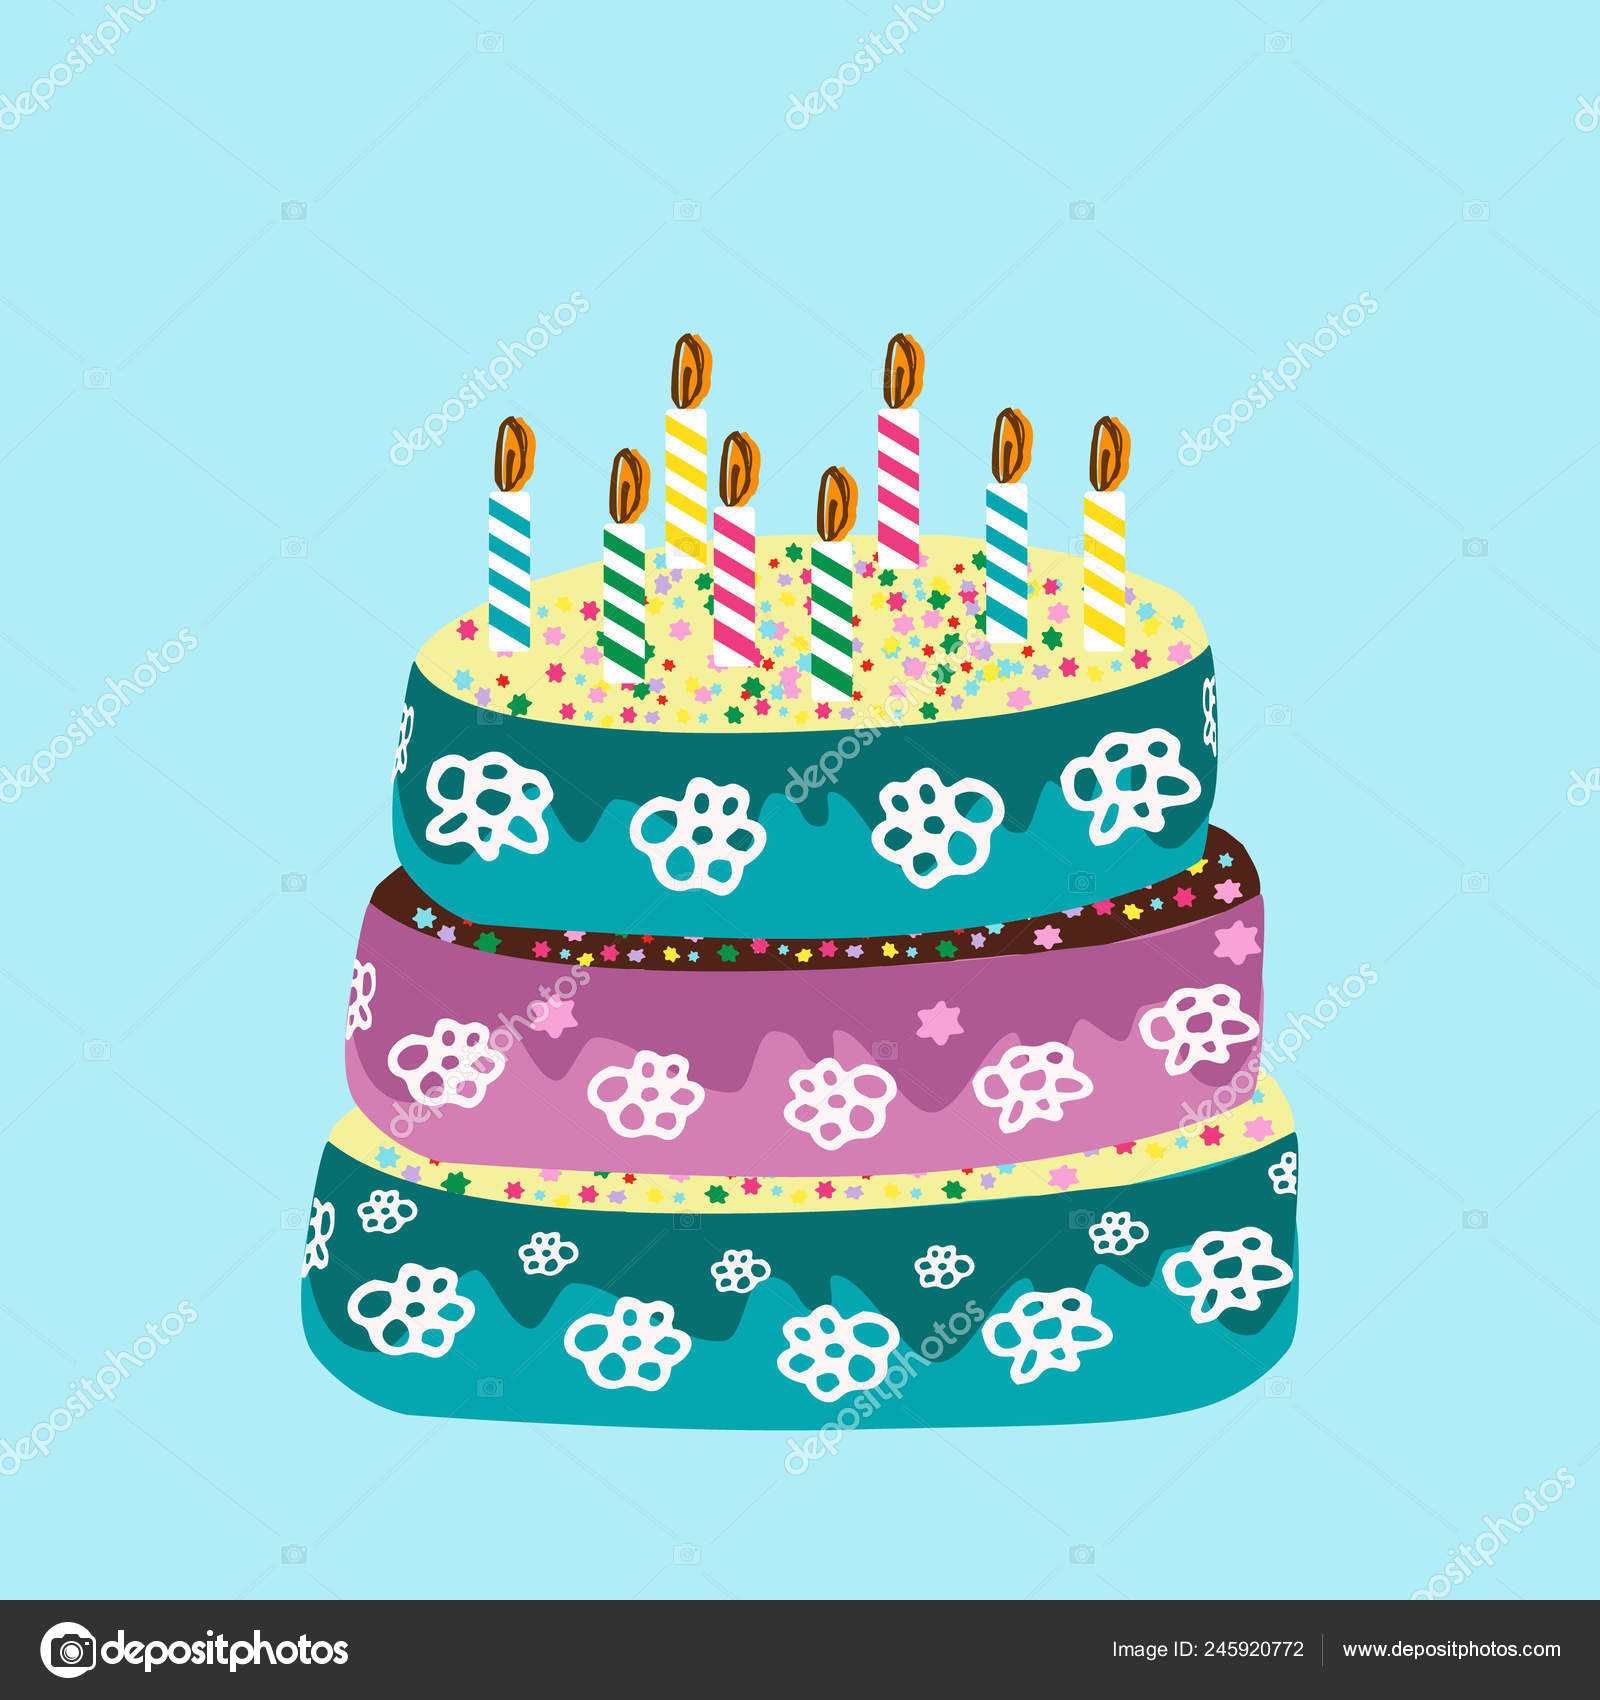 Beautiful Birthday Cake With Birthday Candles Doodle Hand Drawing Vector Illustration Vector Image By C Mikrostoker Vector Stock